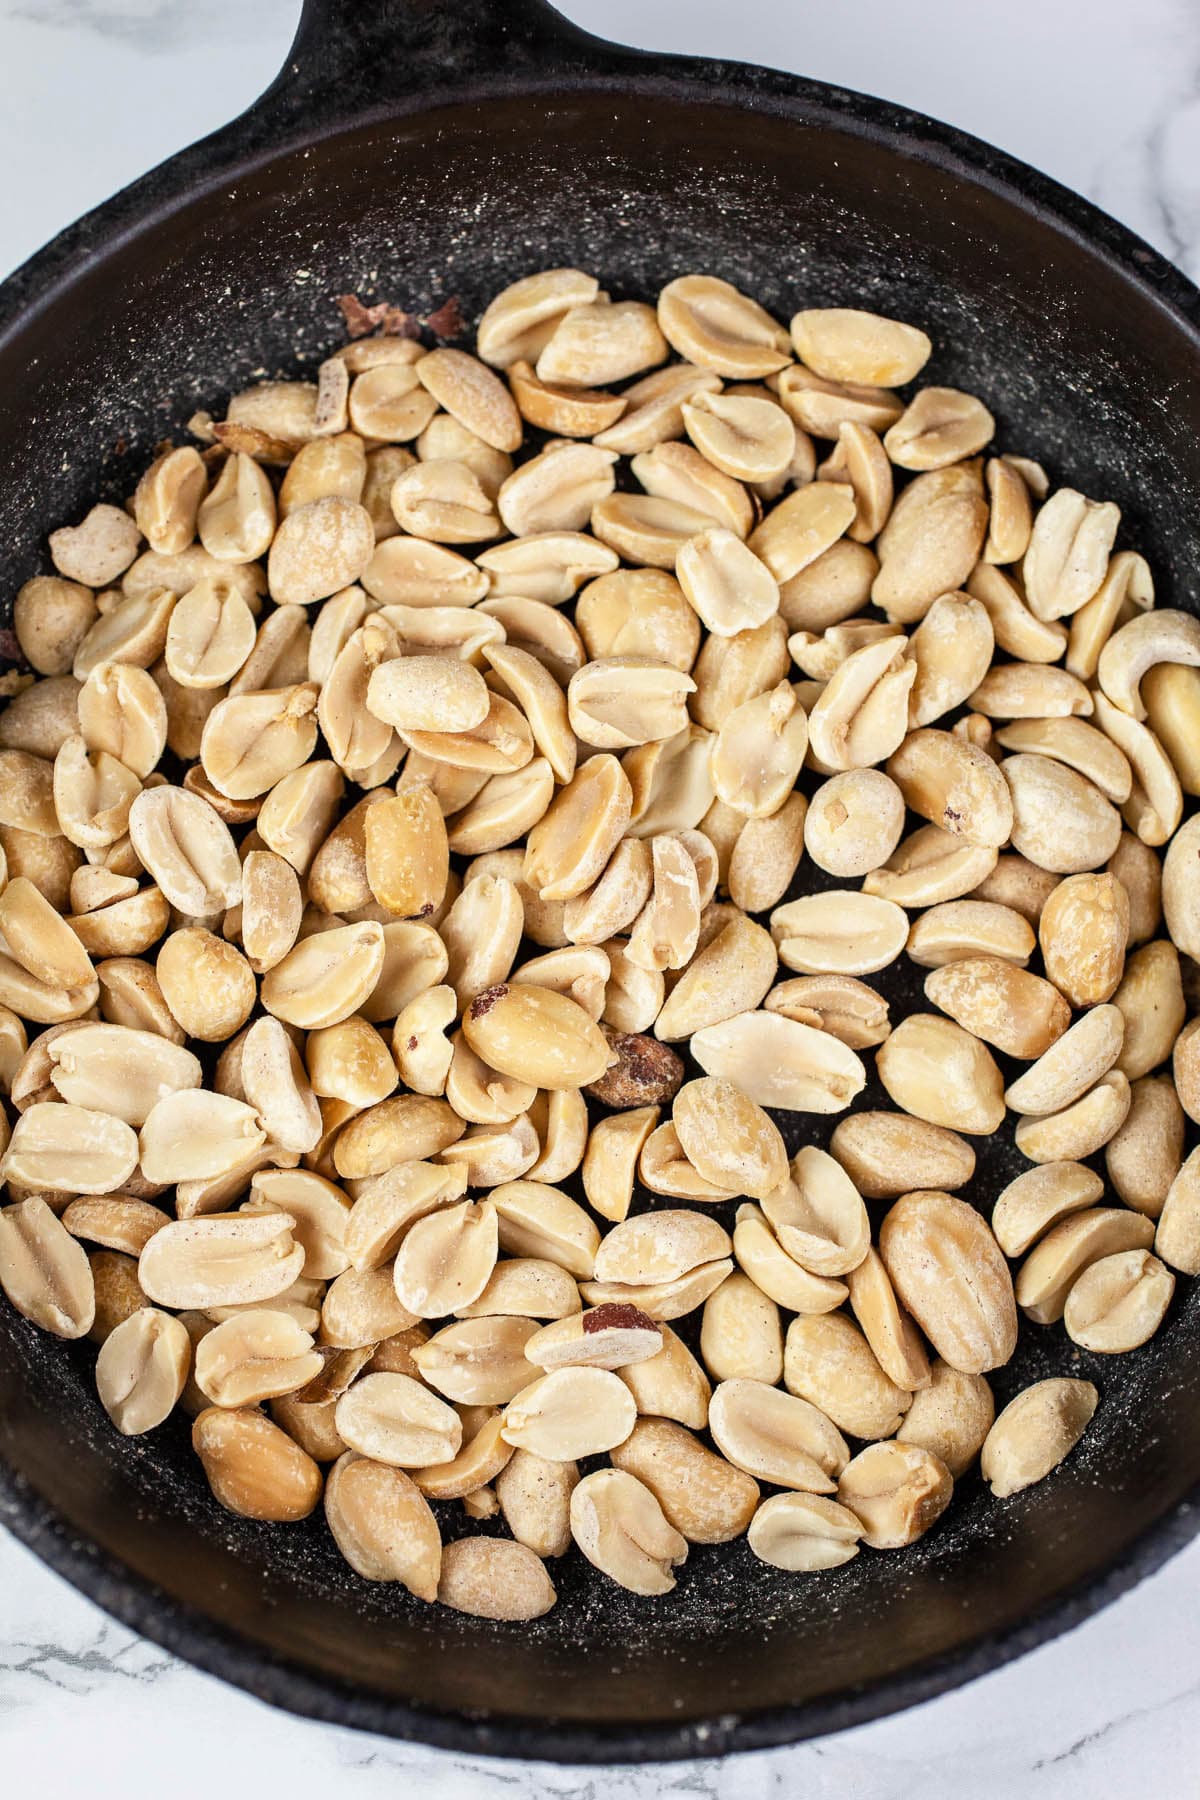 Toasted peanuts in small cast iron skillet.